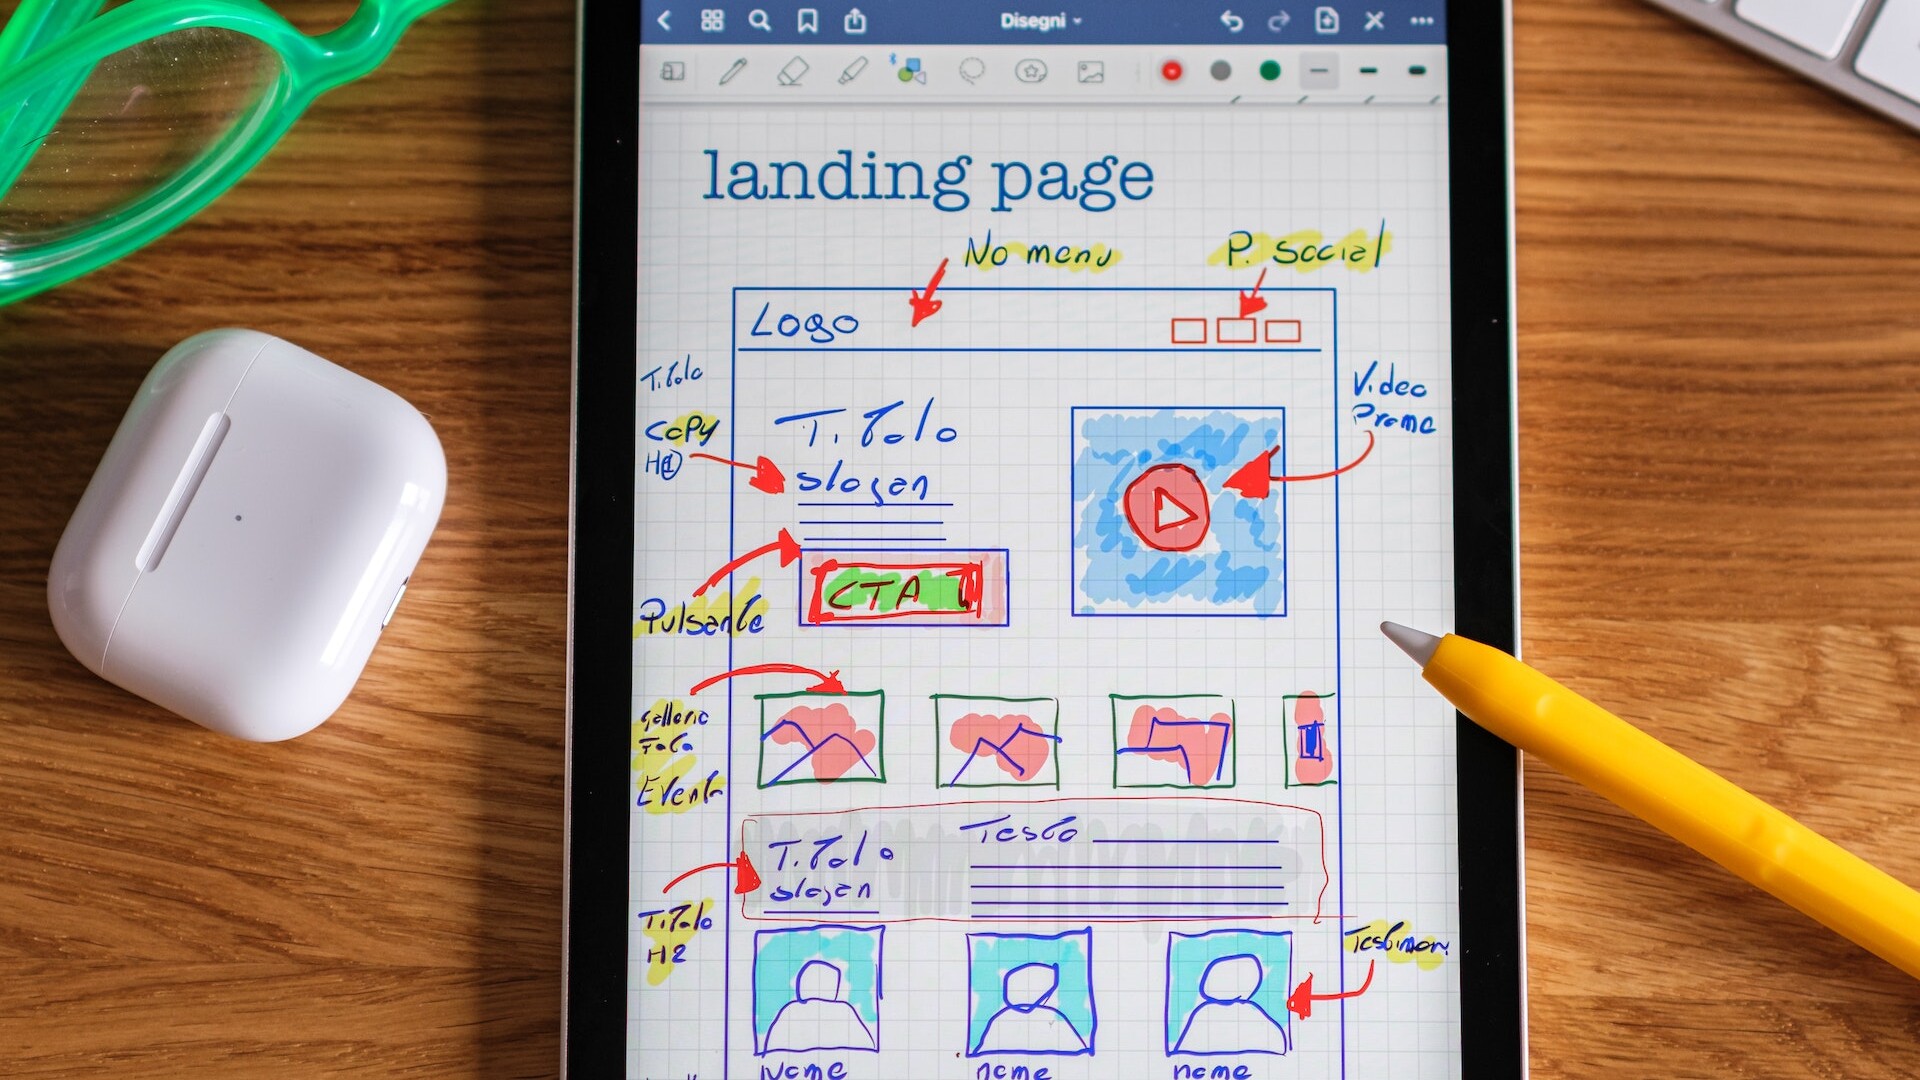 iPad displaying a sketch to a website wireframe